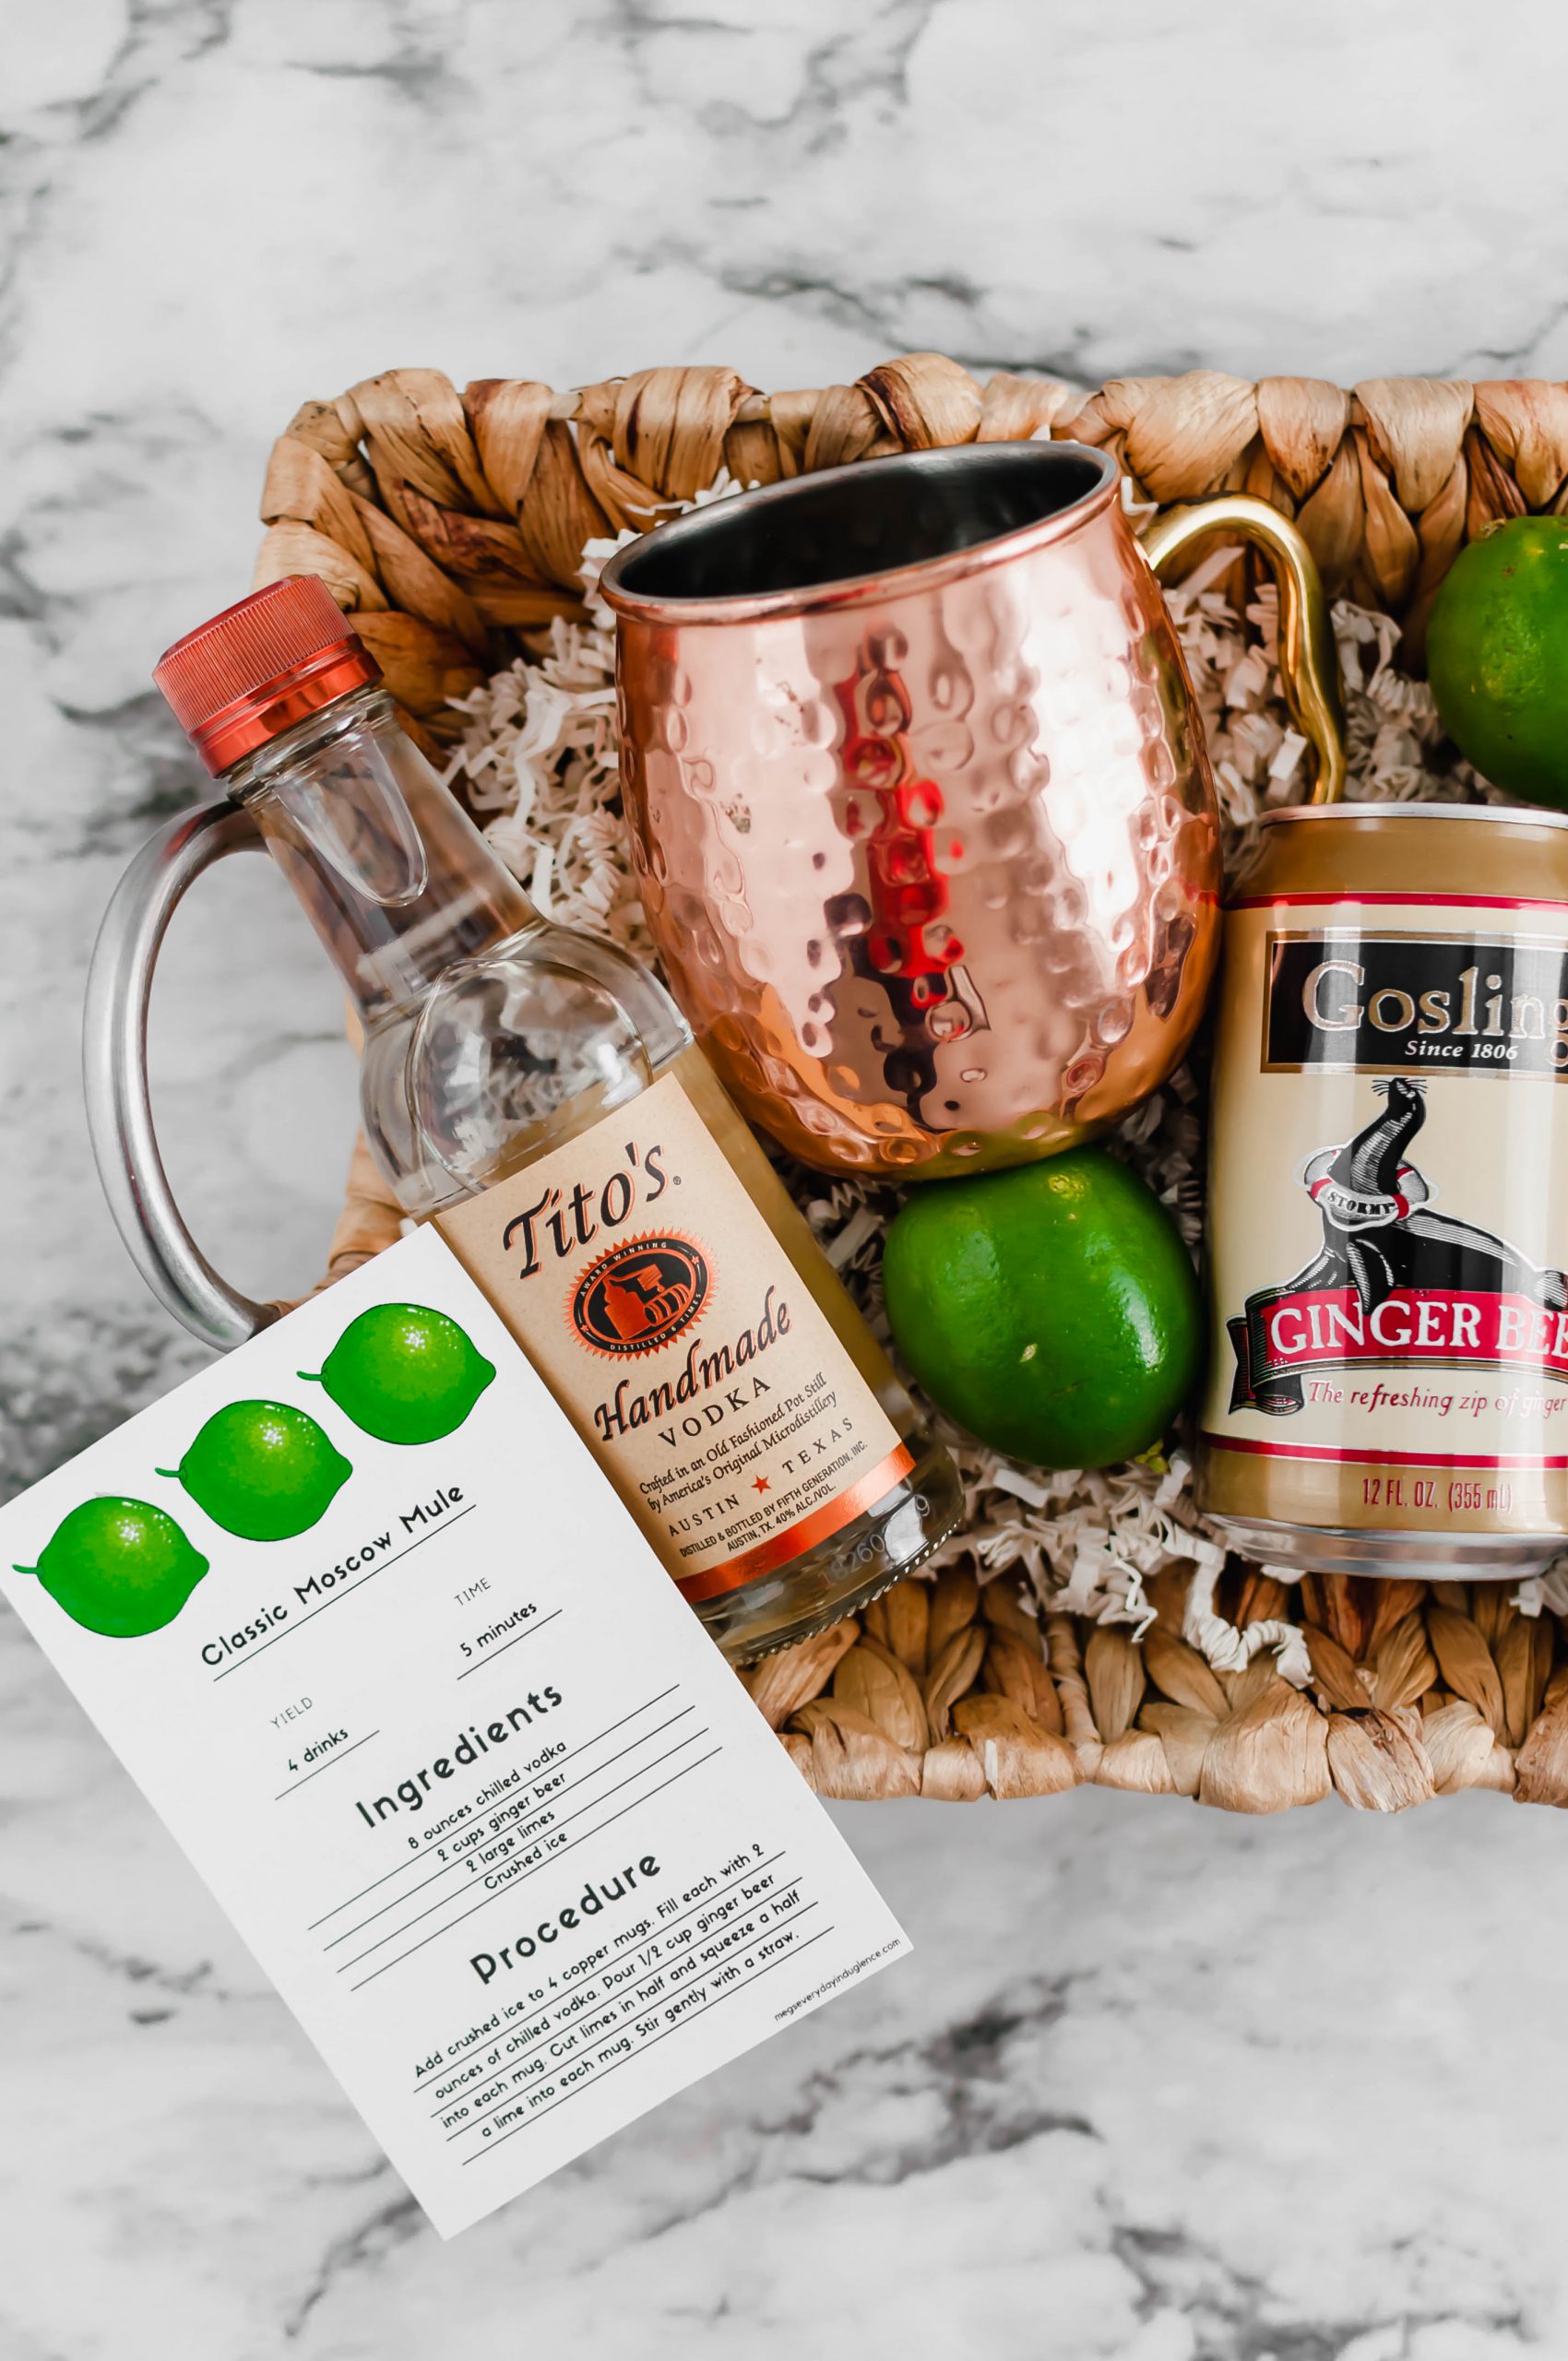 Combine two holiday favorites, drinks and gift giving, with this fun DIY Moscow Mule Kit. A cute recipe card printable is available for free download too.